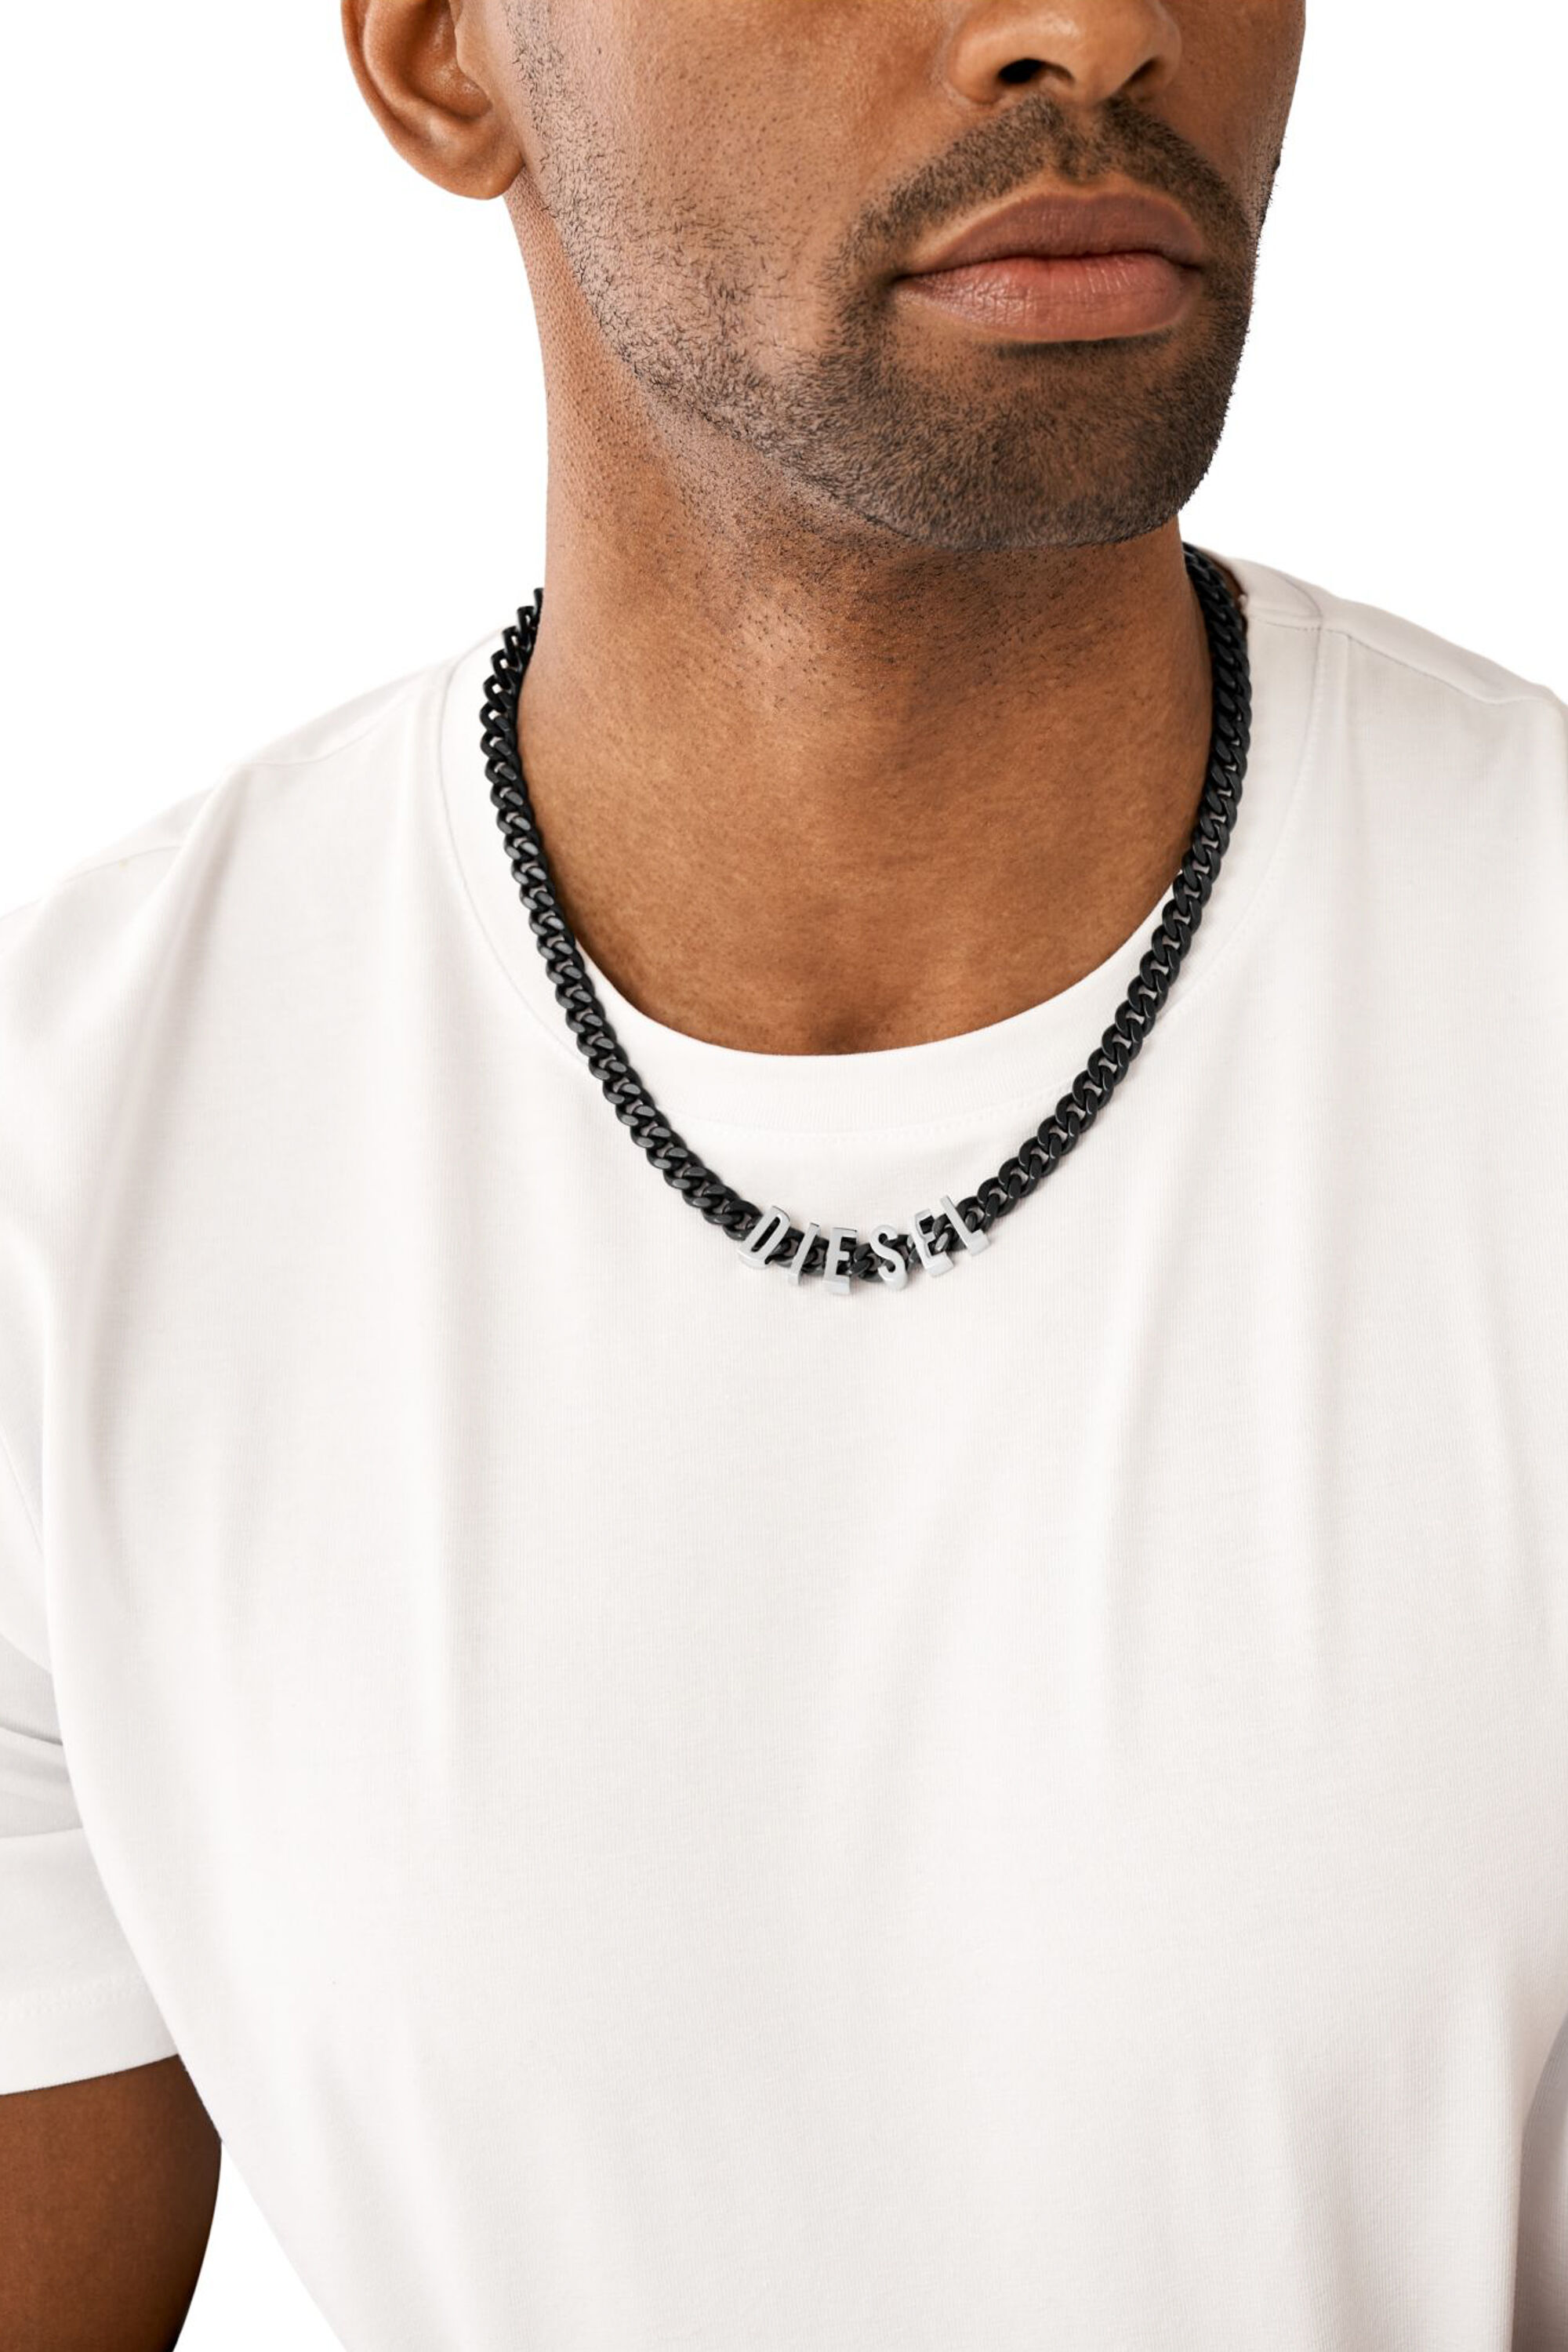 DX1487 Two-Tone stainless steel chain necklace｜ブラック｜メンズ 